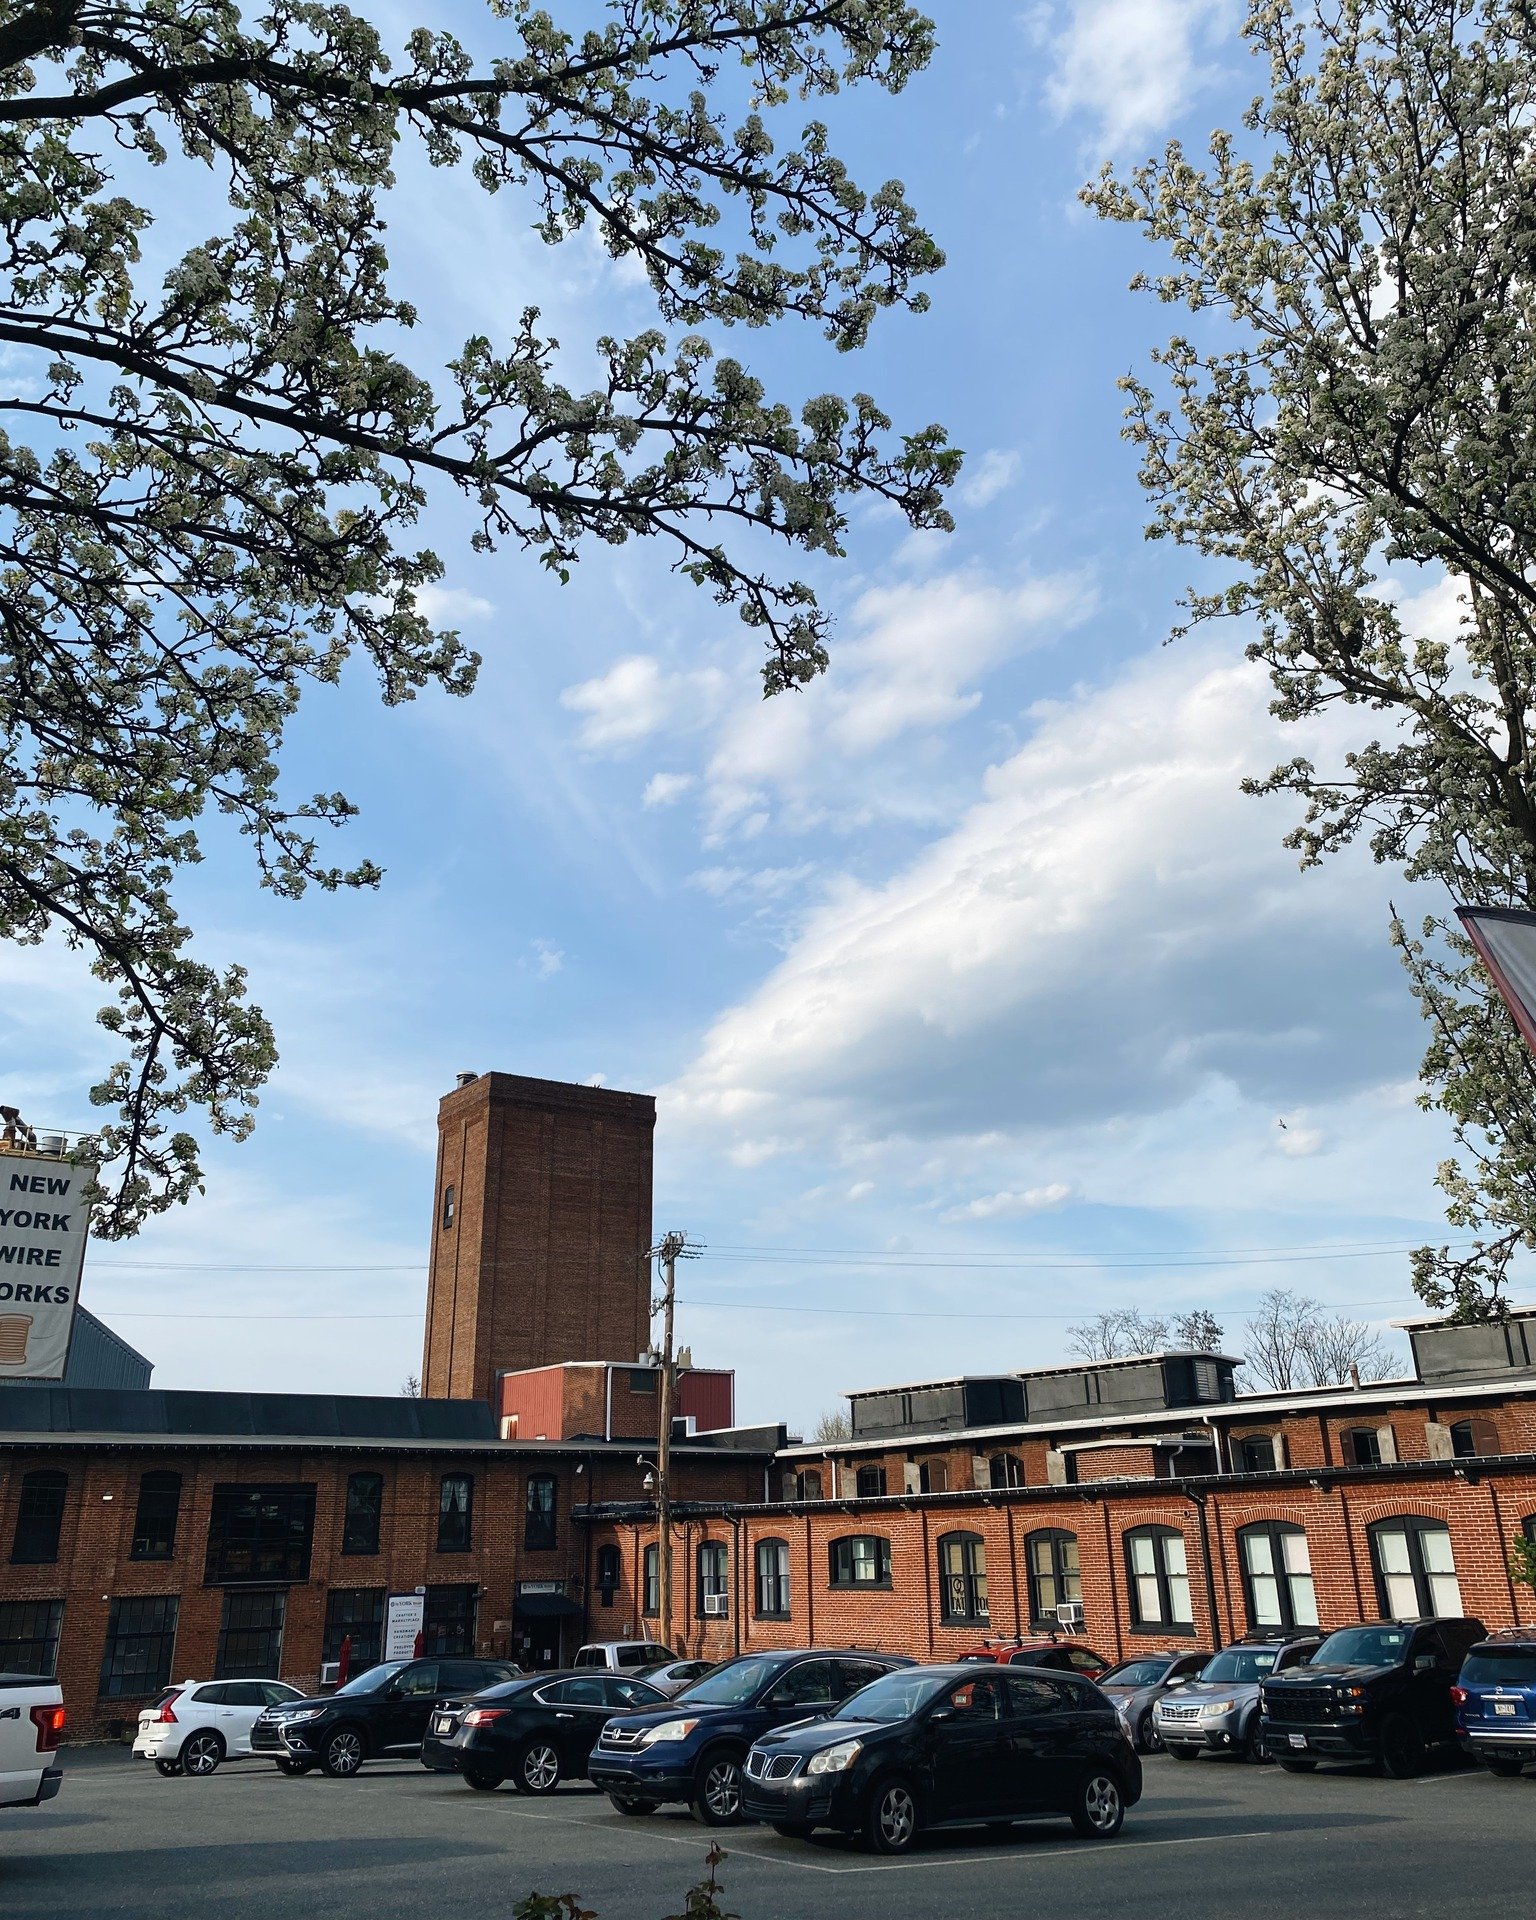 What a beautiful day to spend at New York Wire Works!

Shop over 100 small businesses &amp; makers at The York Merchant &amp; The Wireworks Exchange and Flea. Grab a drink and a bite at @Wired Chef. Browse our Creator's Gallery featuring local artist